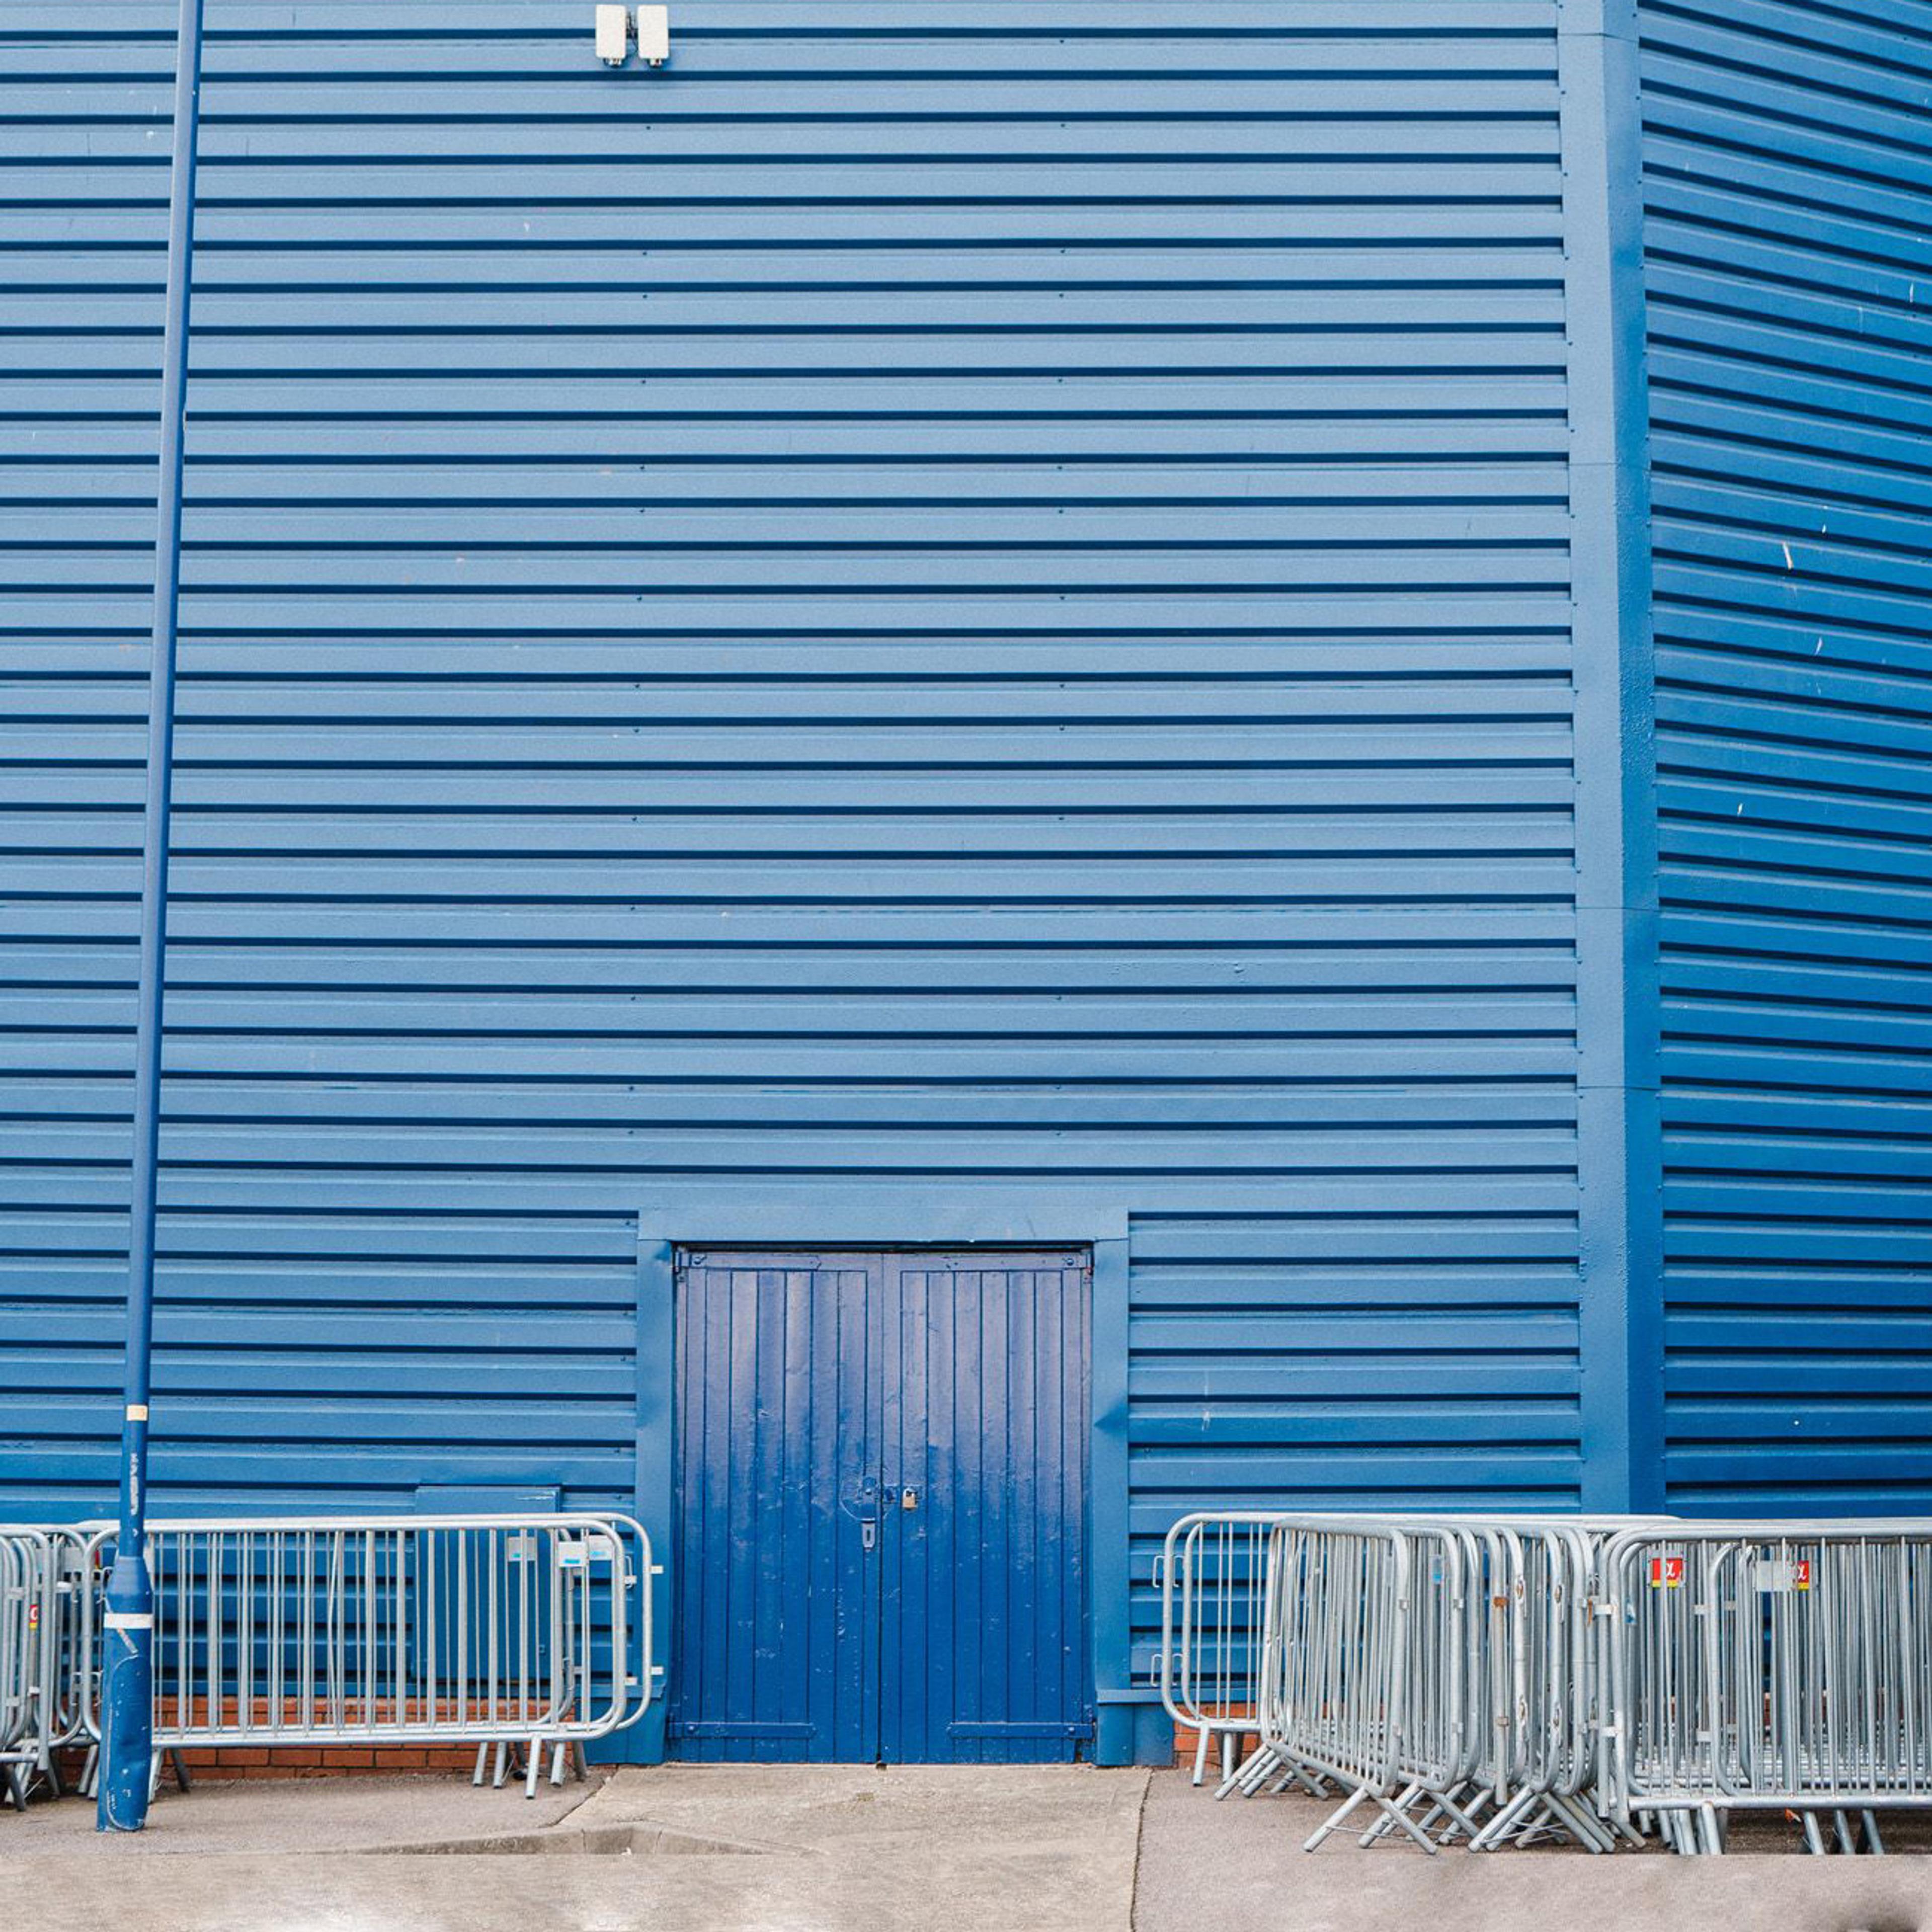 Some security fences stacked up next to a padlocked entrance to a tall blue building